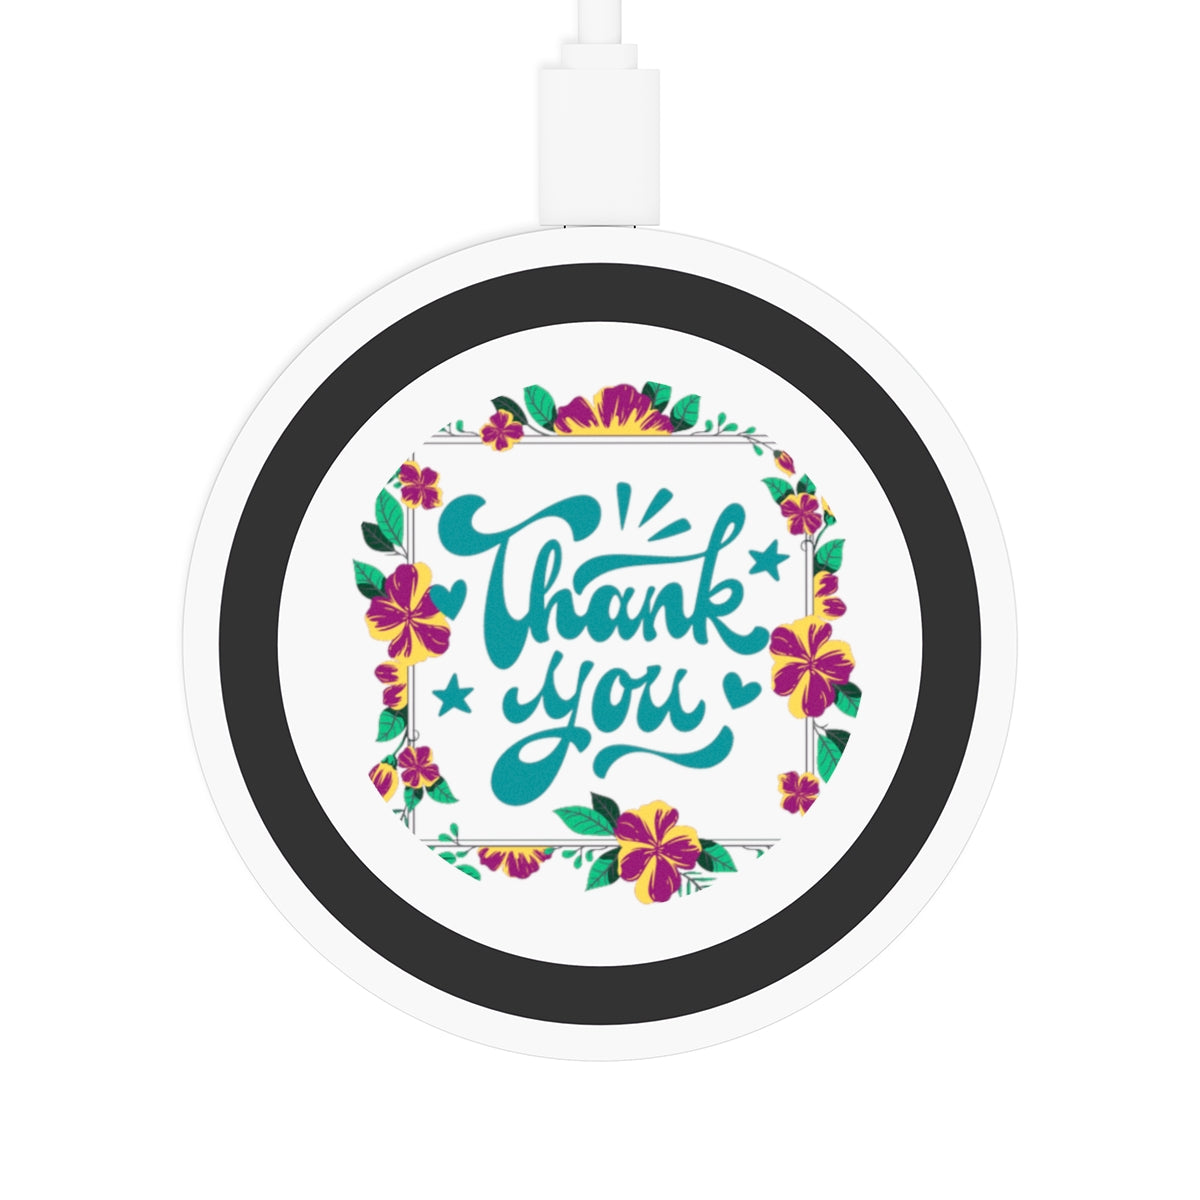 Thank you Inspirational gifts Wireless Charging Pad